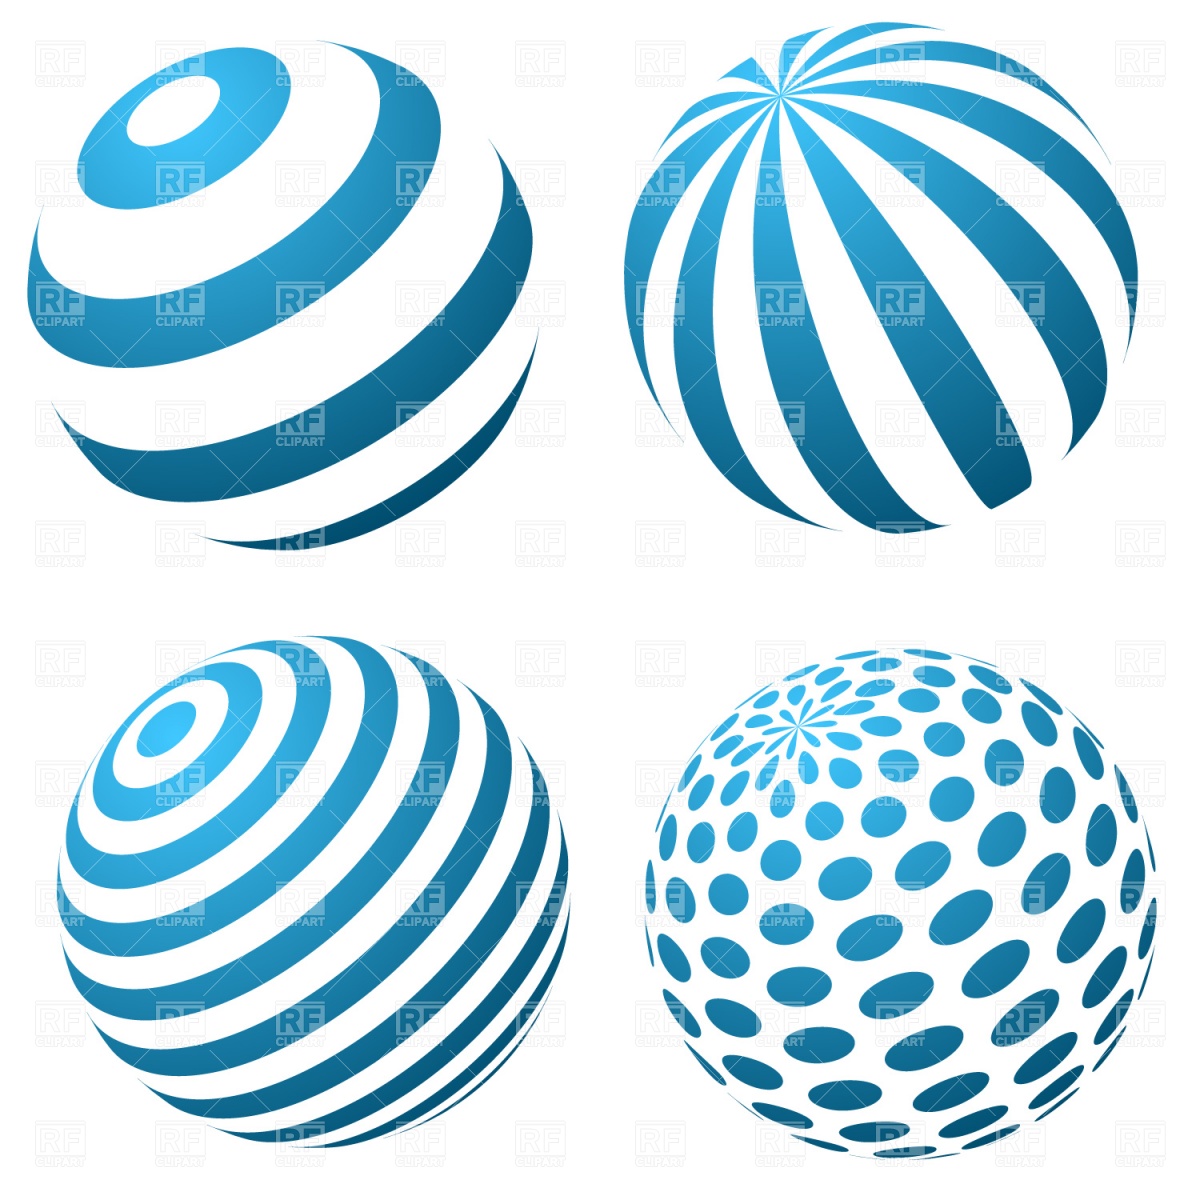 Set Of 3d Spheres 1220 Business Finance Download Royalty Free    